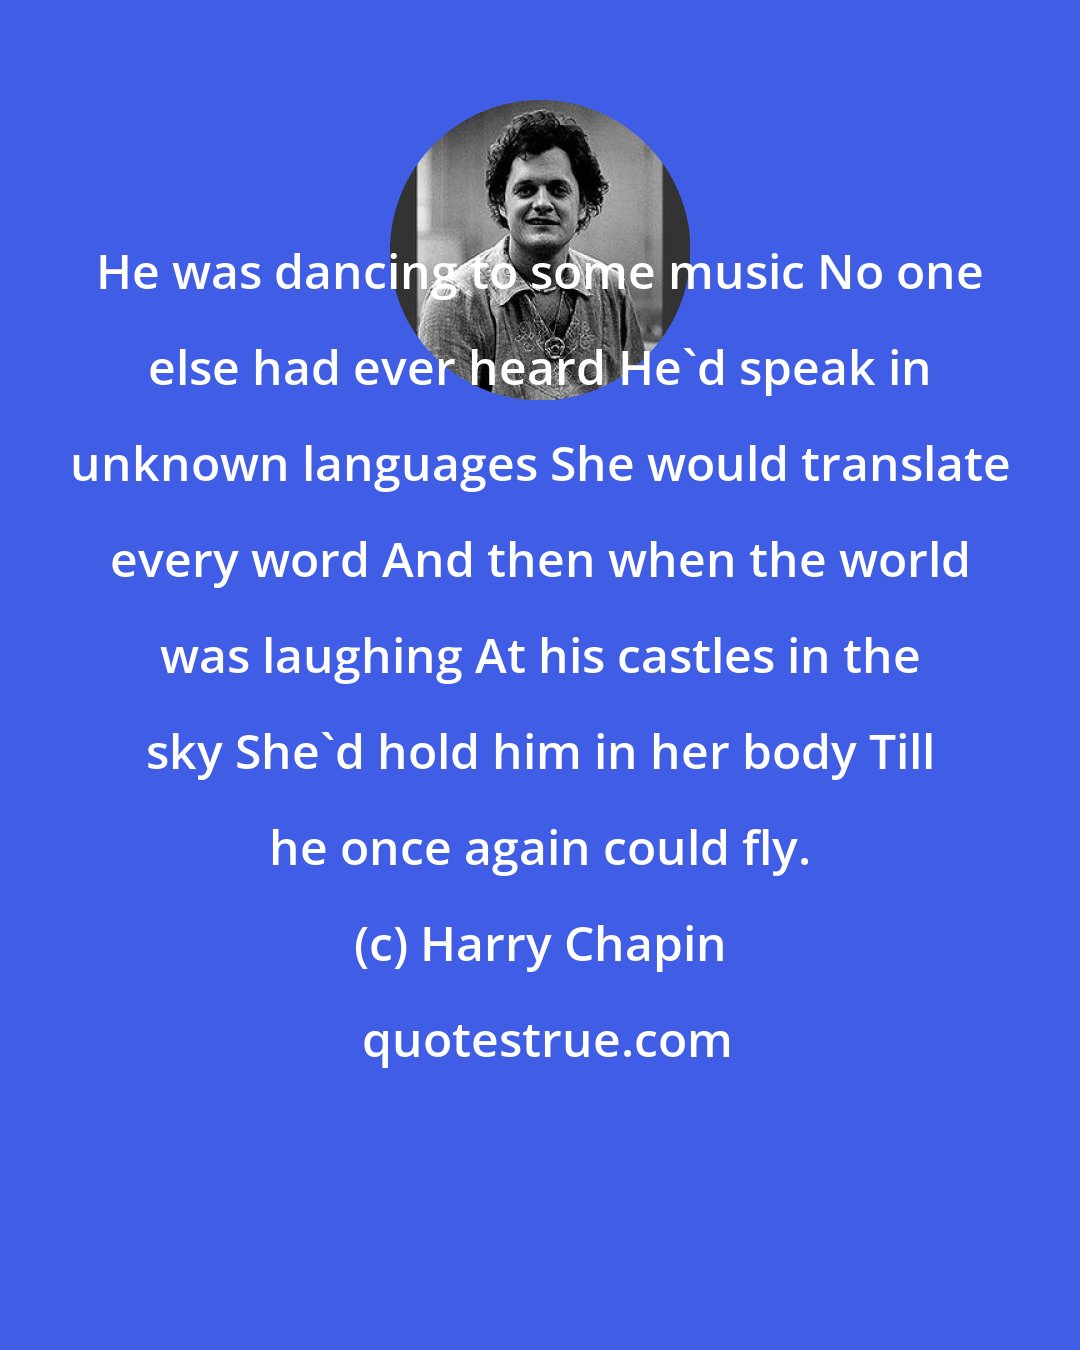 Harry Chapin: He was dancing to some music No one else had ever heard He'd speak in unknown languages She would translate every word And then when the world was laughing At his castles in the sky She'd hold him in her body Till he once again could fly.